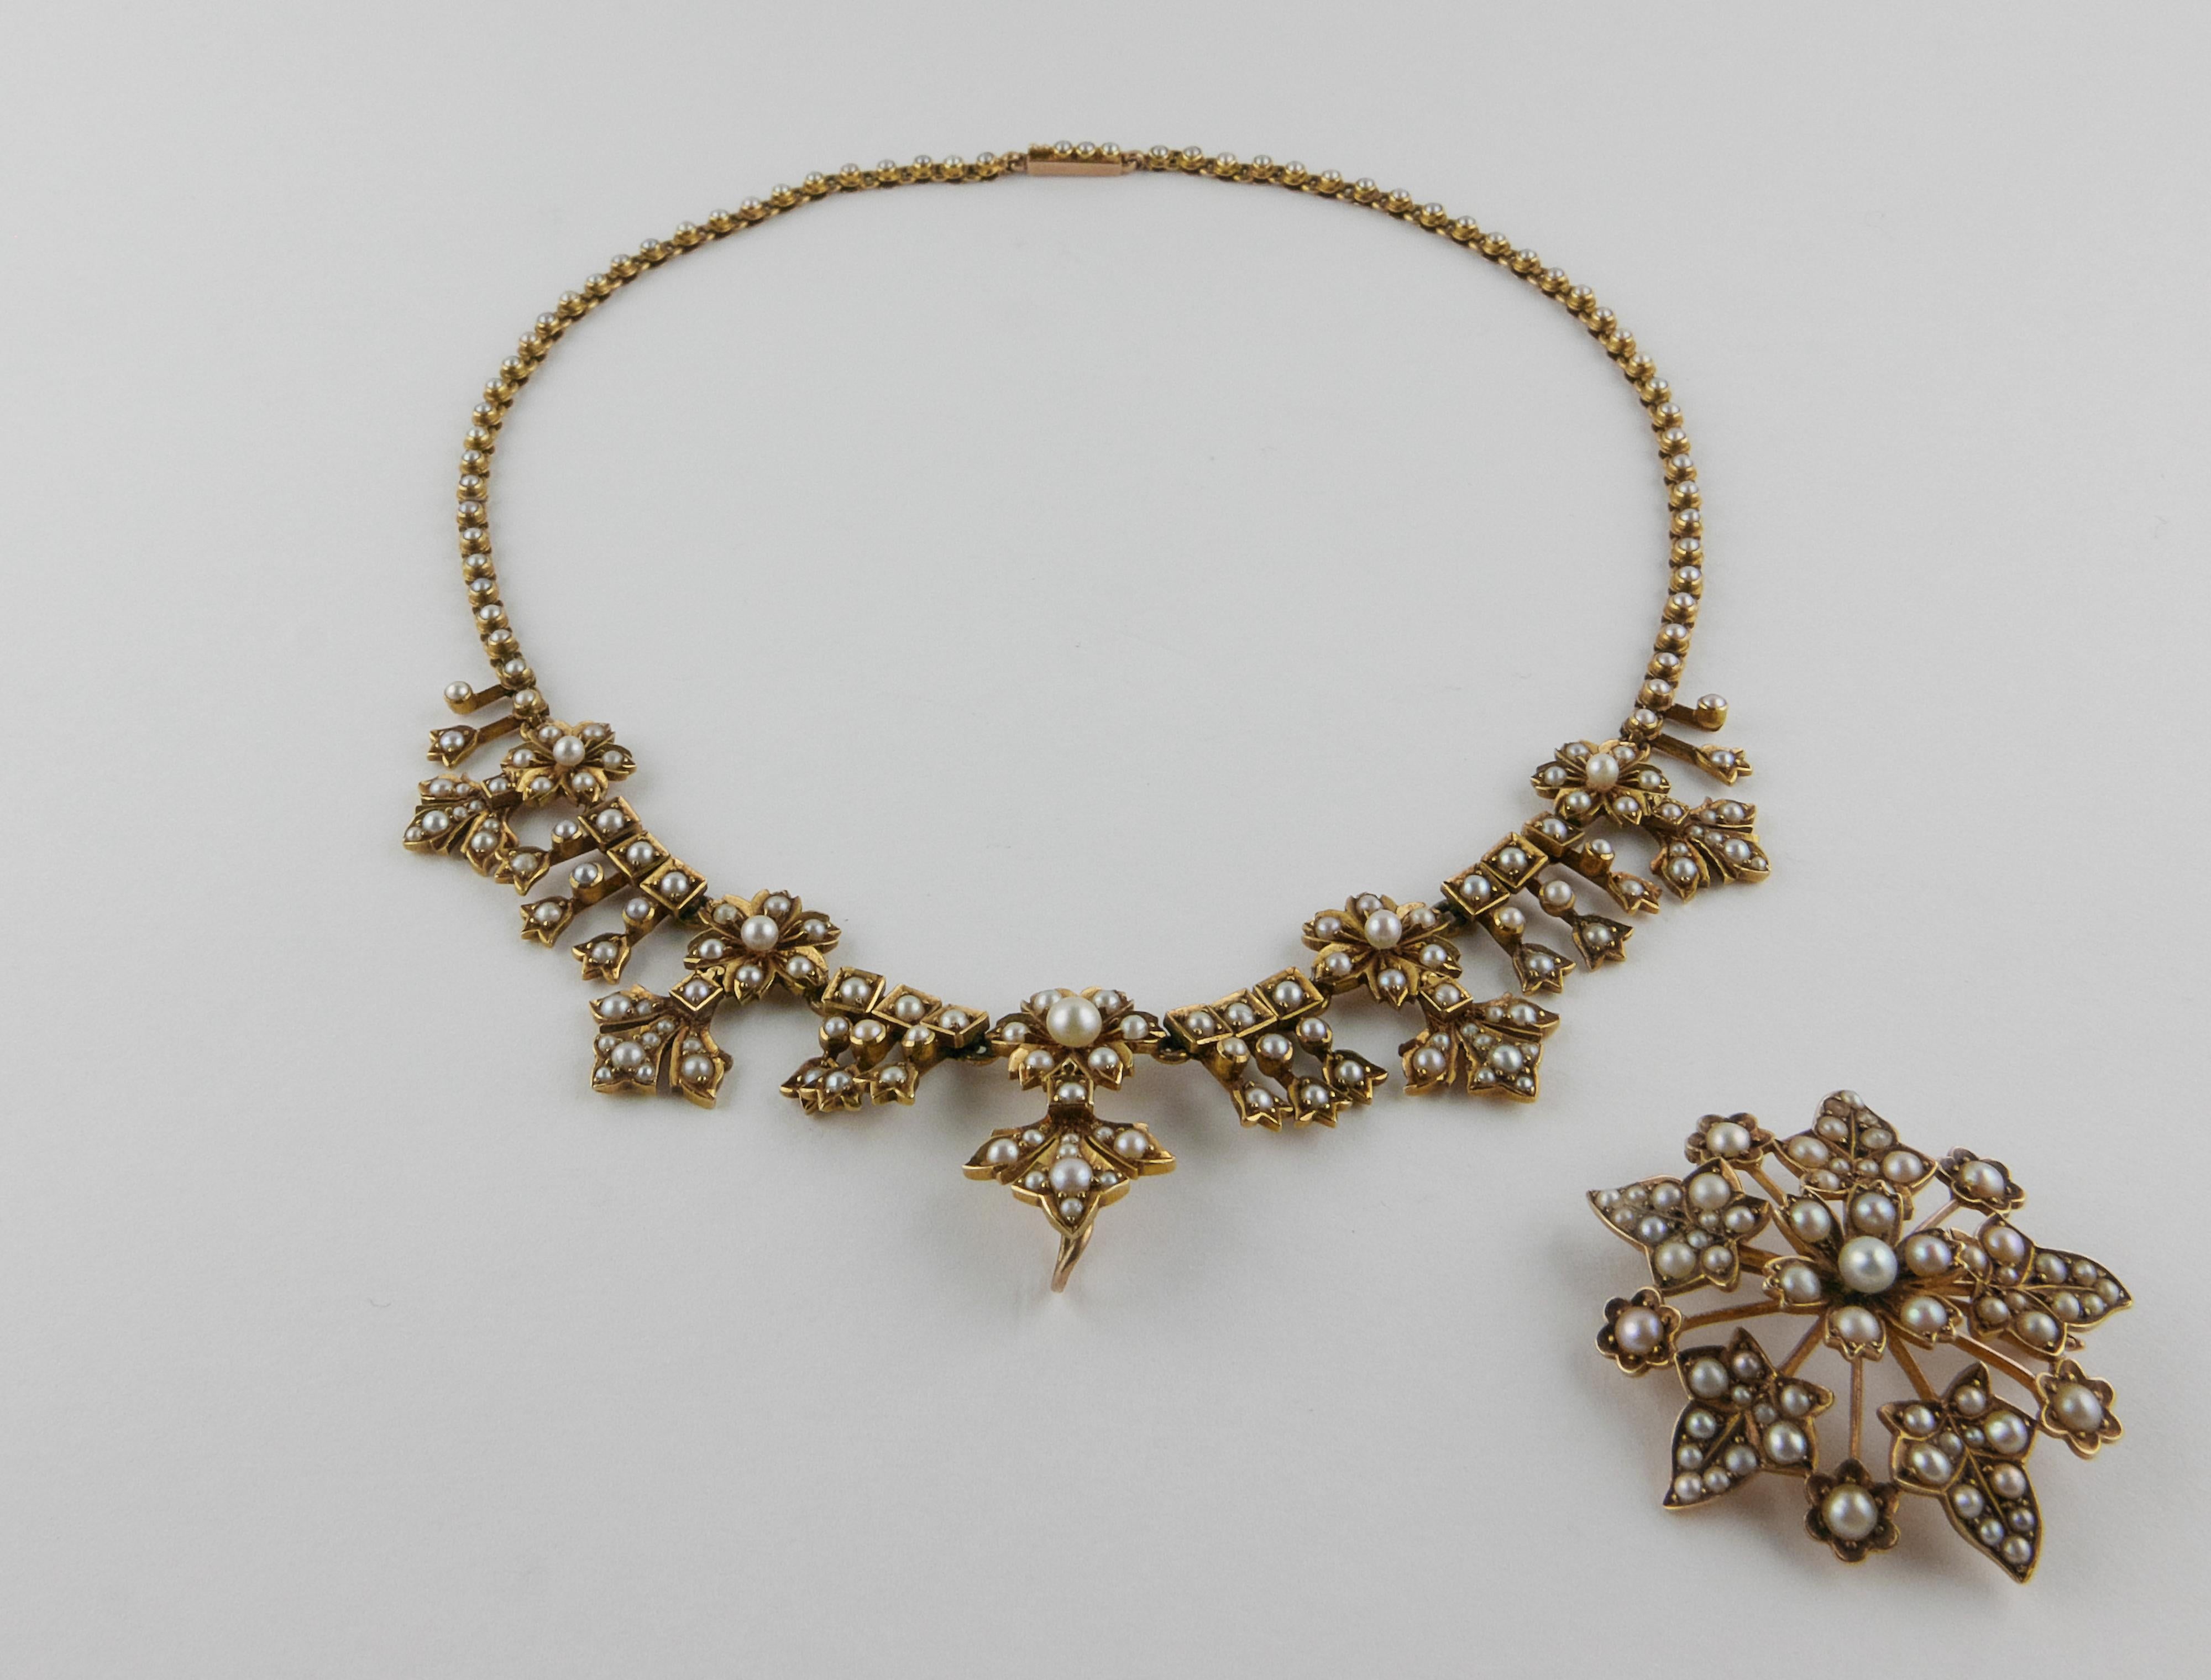 A lovely example of a 19th century piece of jewelry dating circa 1860. This delicate antique Necklace with a pendant Brooch  are finely made in 15 karat Yellow Gold with exquisite extra details encompassed. The Necklace and the pendant Brooch are